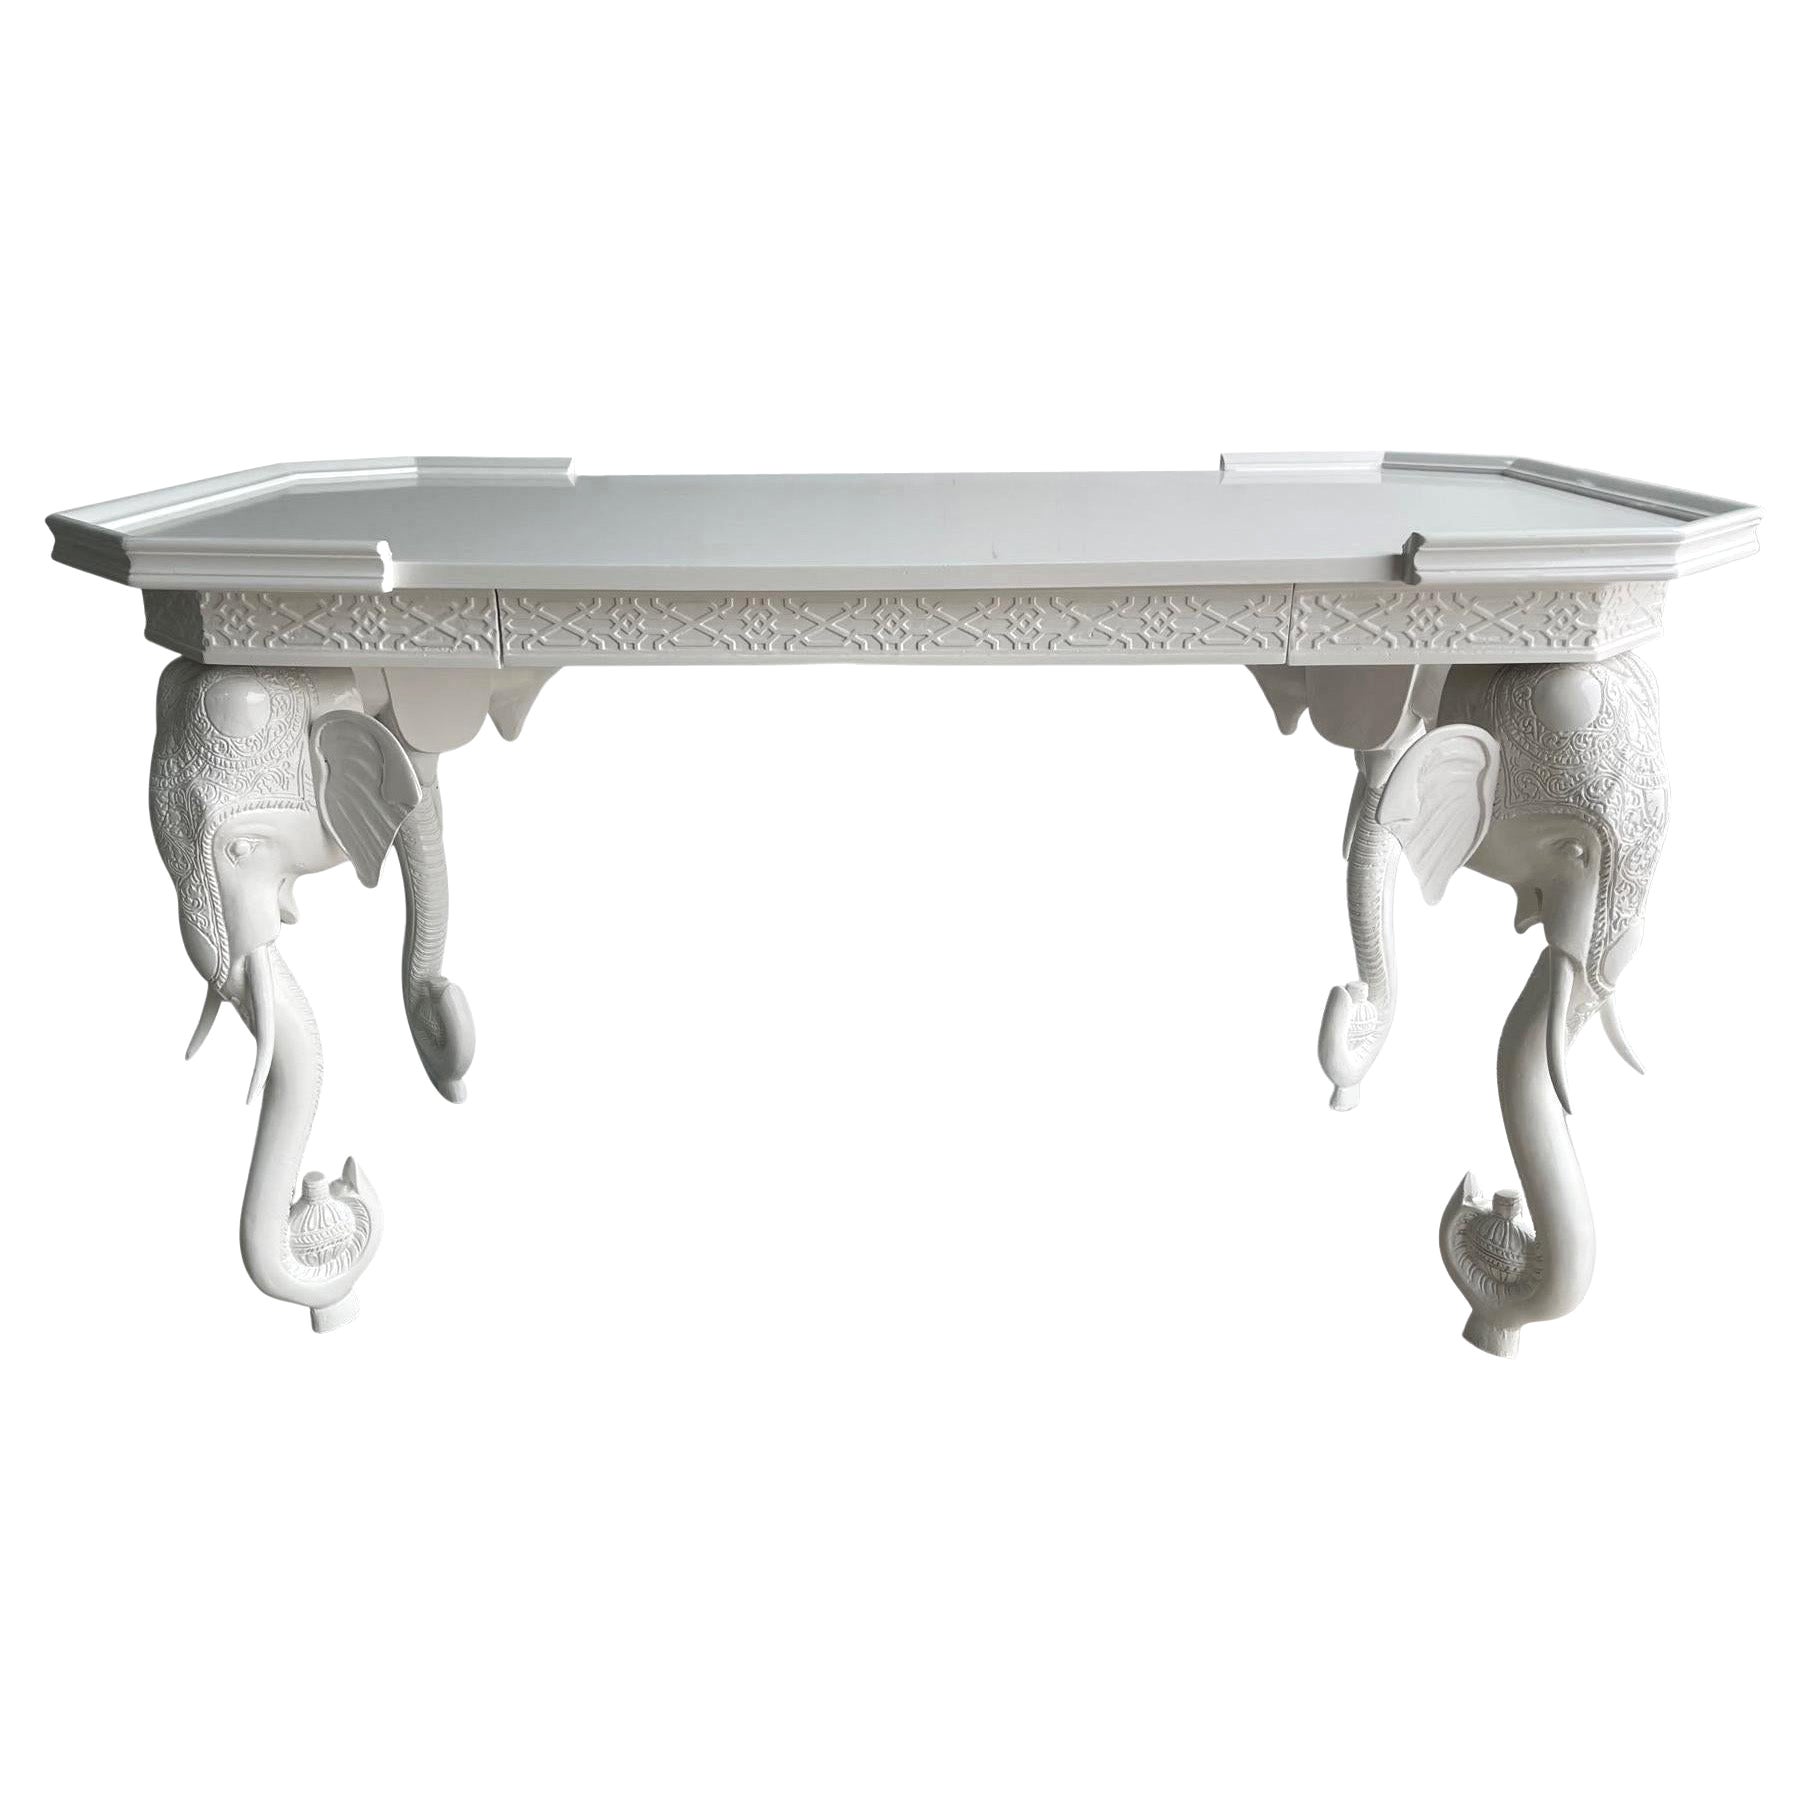 Hollywood Regency White Lacquered Desk or Console by Gampel-Stoll